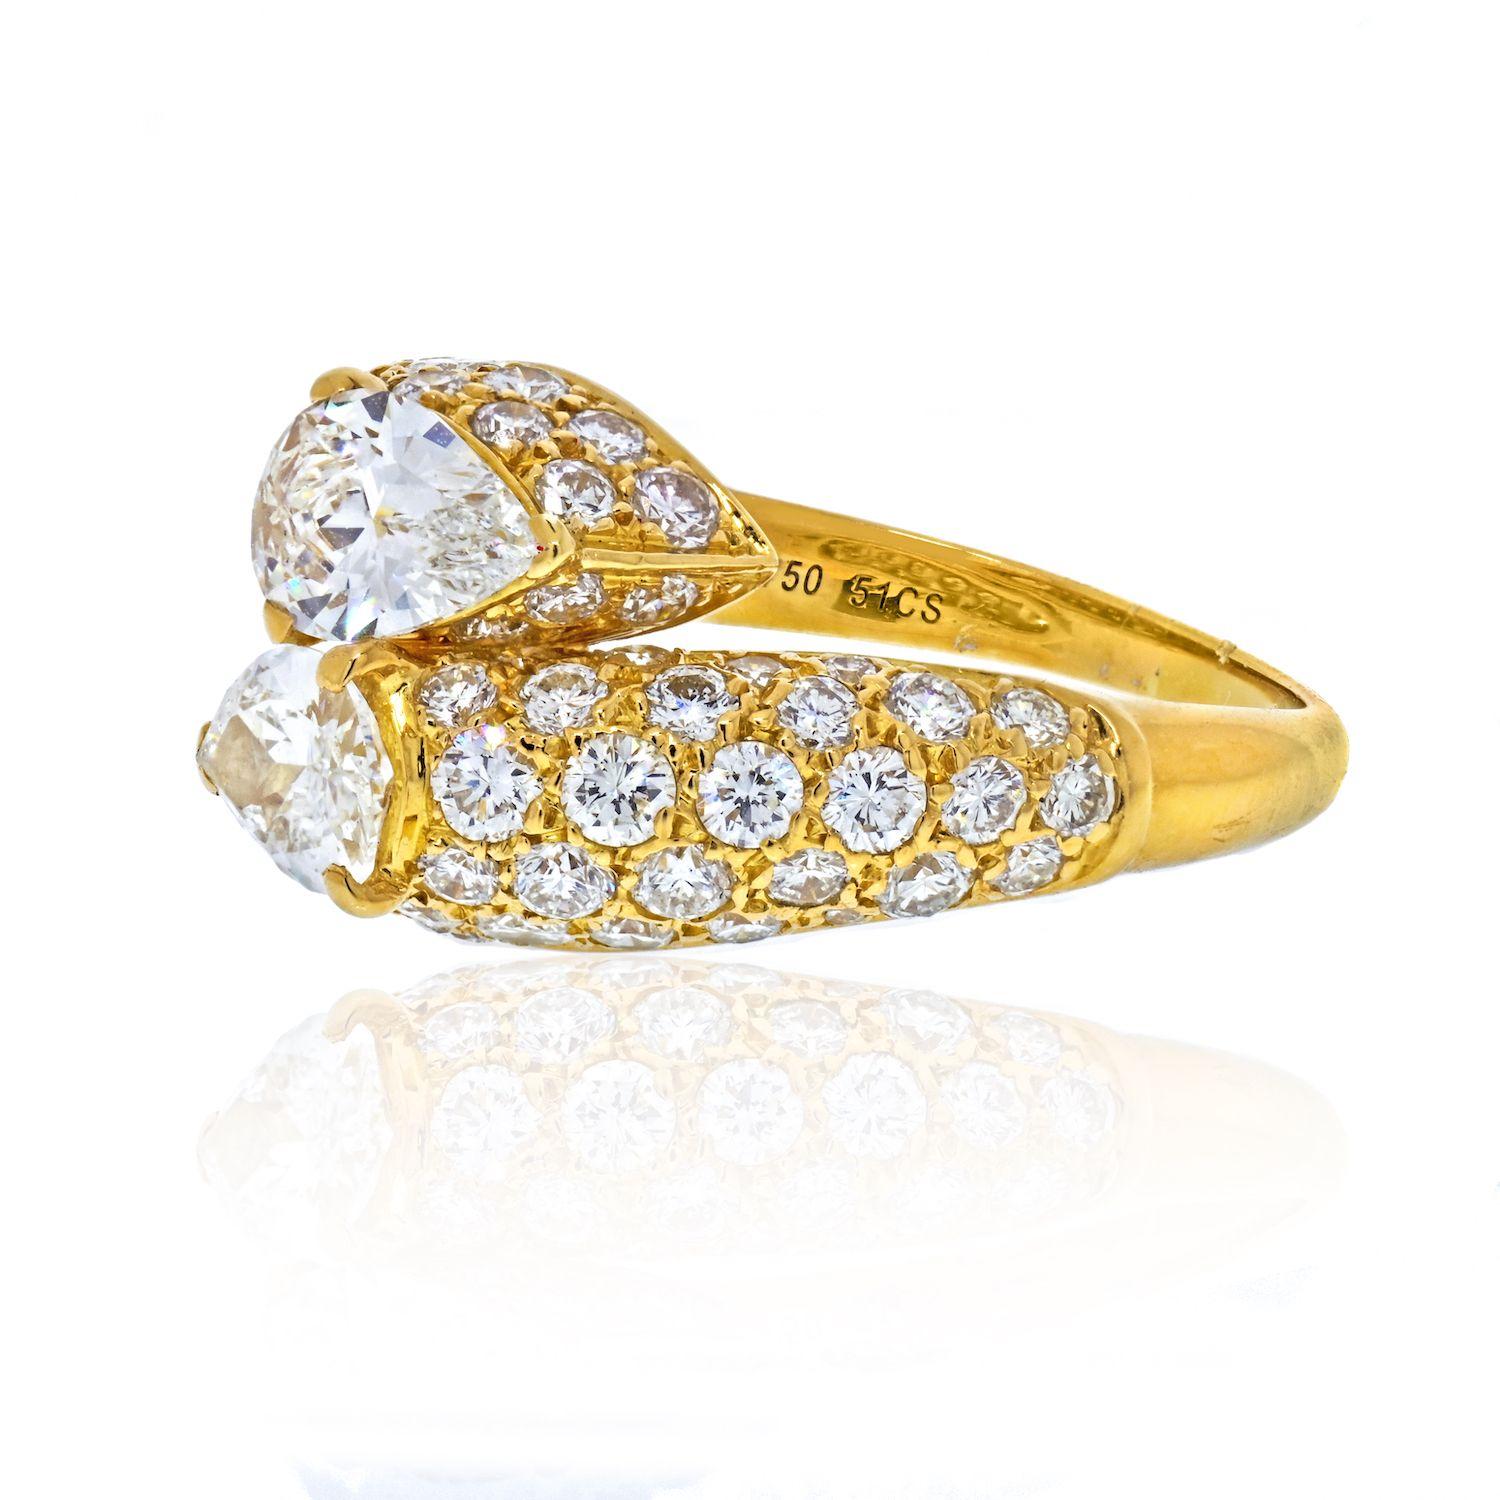 Rare Discontinued Cartier Deux Tetes Croisees Diamond Ring. 

Set with 2 pear shape brilliant cut diamonds and pave round brilliant cut diamonds. 

This design ring is also referred as a bypass or crossover. 

This ring dazzles with the slight of